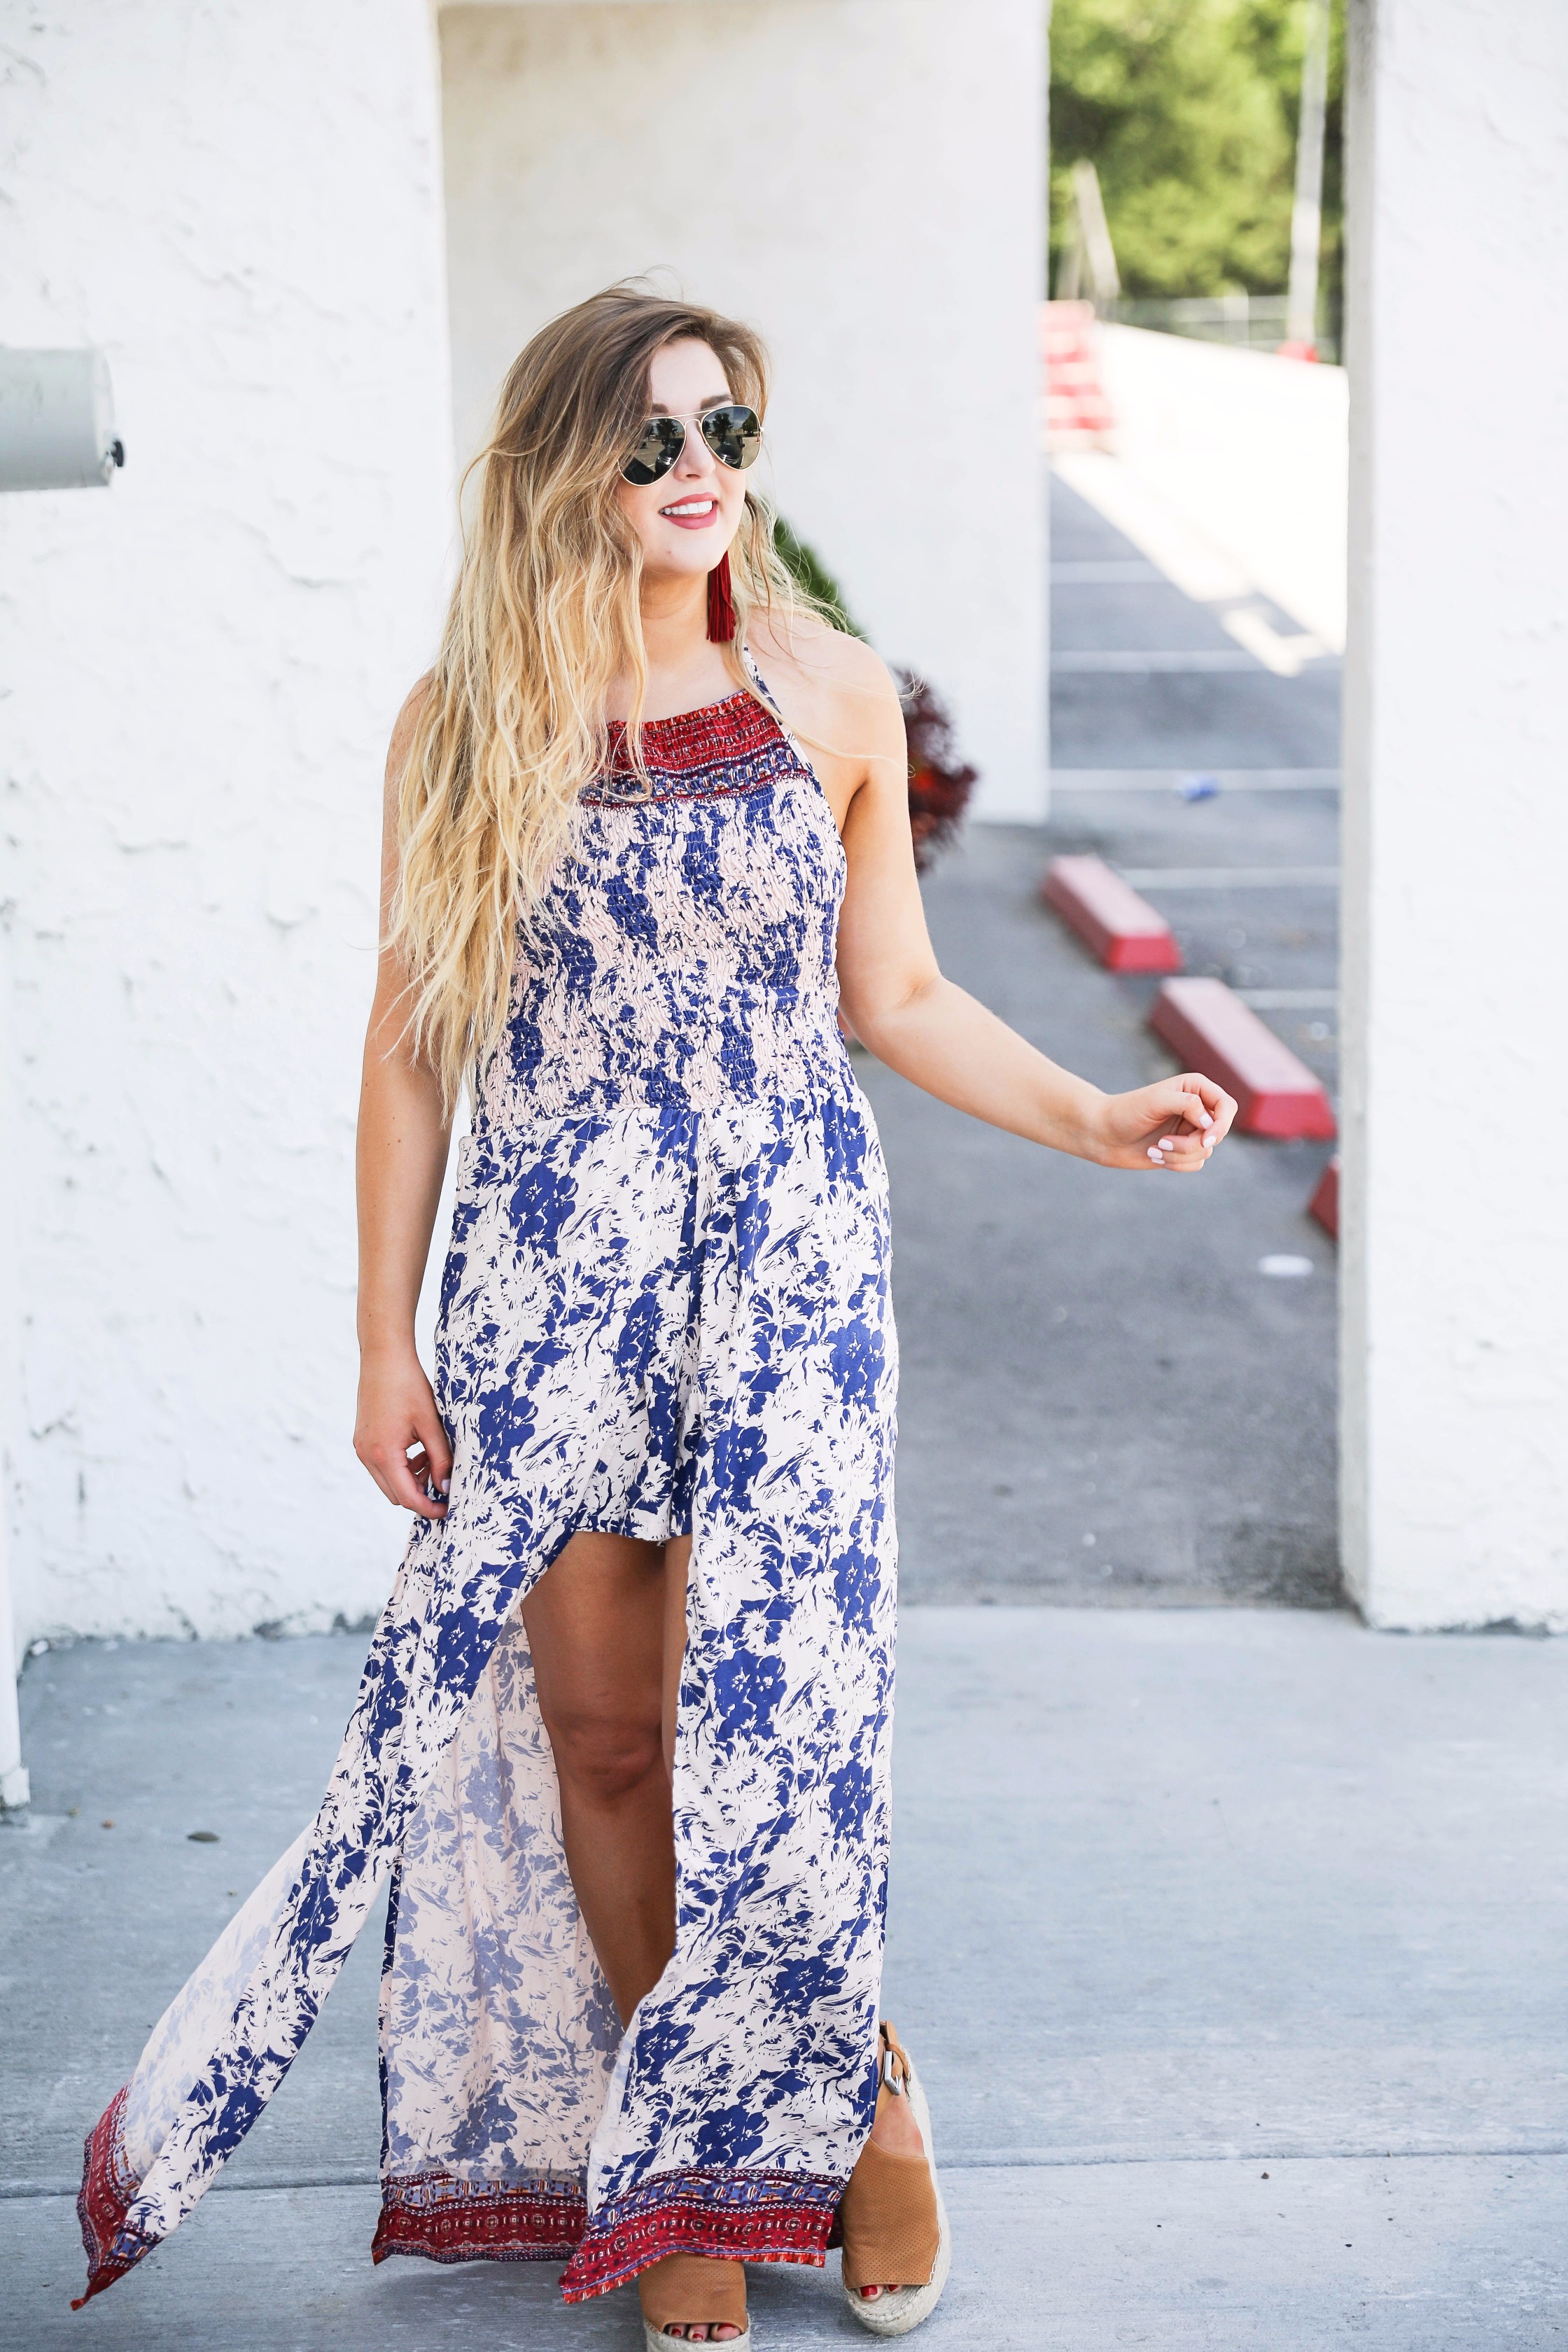 Boho halter romper maxi combo with beachy hair and a bold lip! I also paired these fun burgundy tassel earrings with the look. By fashion blogger lauren lindmakr on daily dose of charm